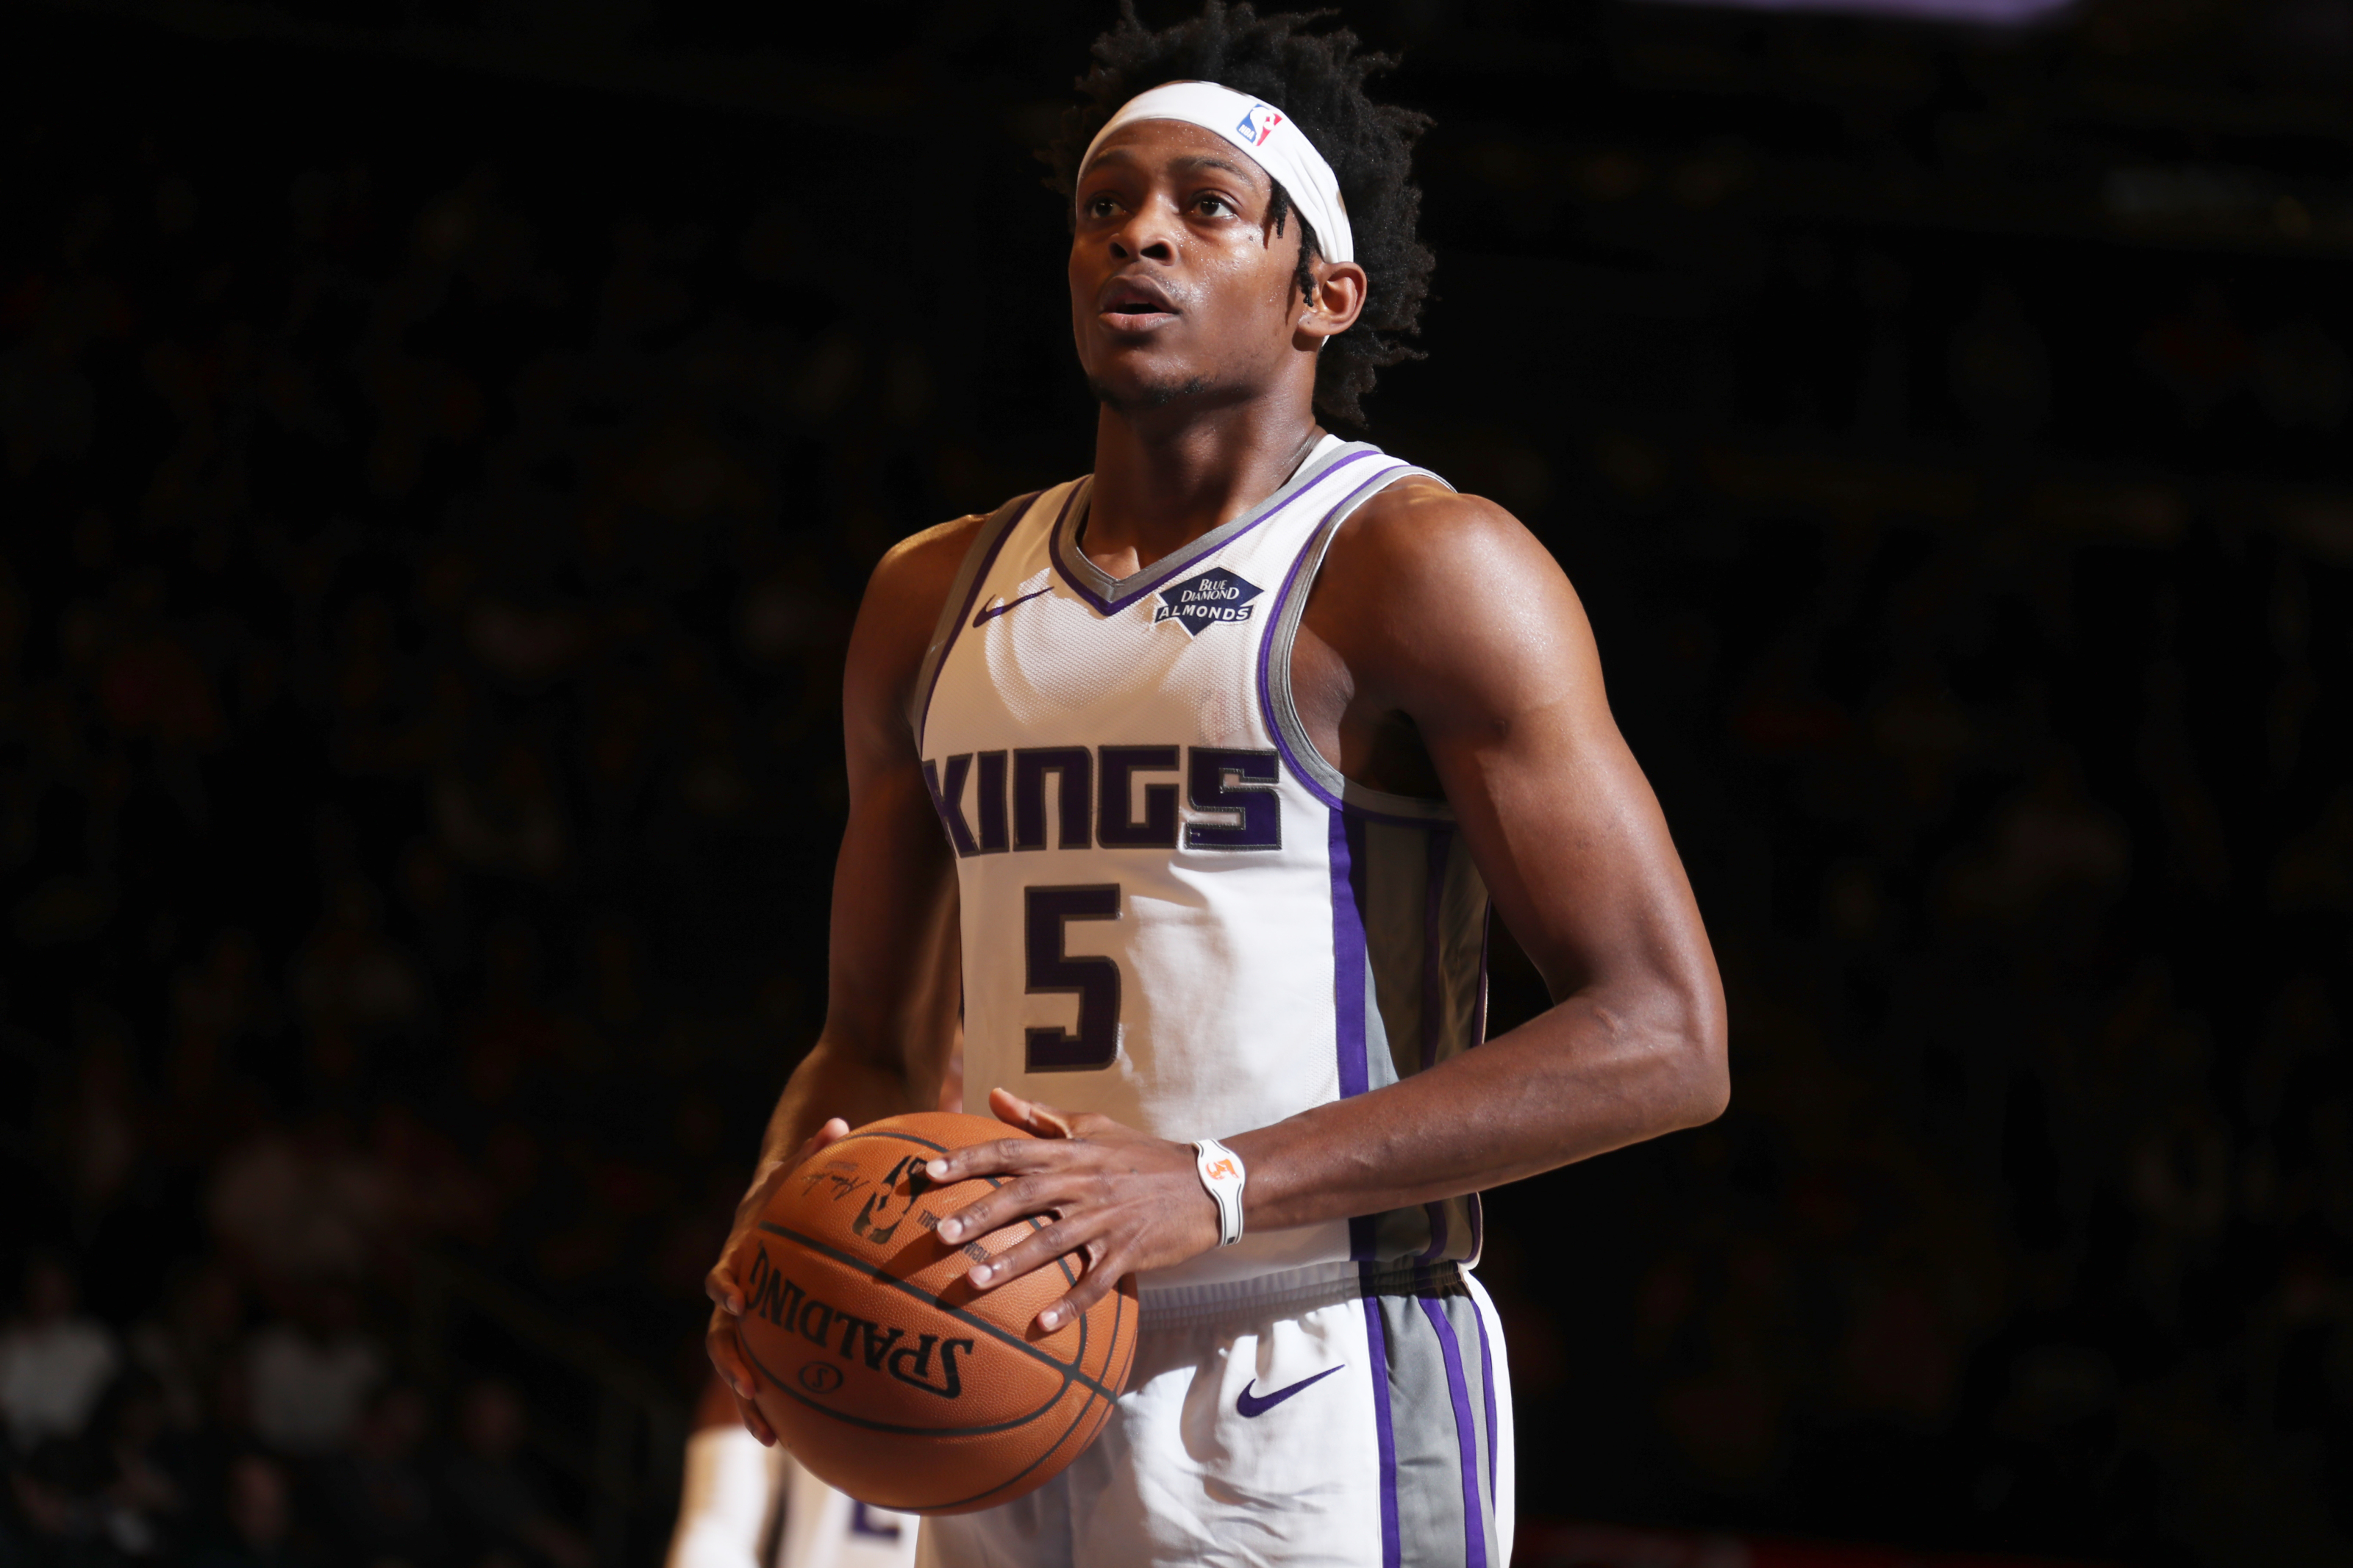 De'Aaron Fox (24 points) puts on a show at MSG vs. Knicks